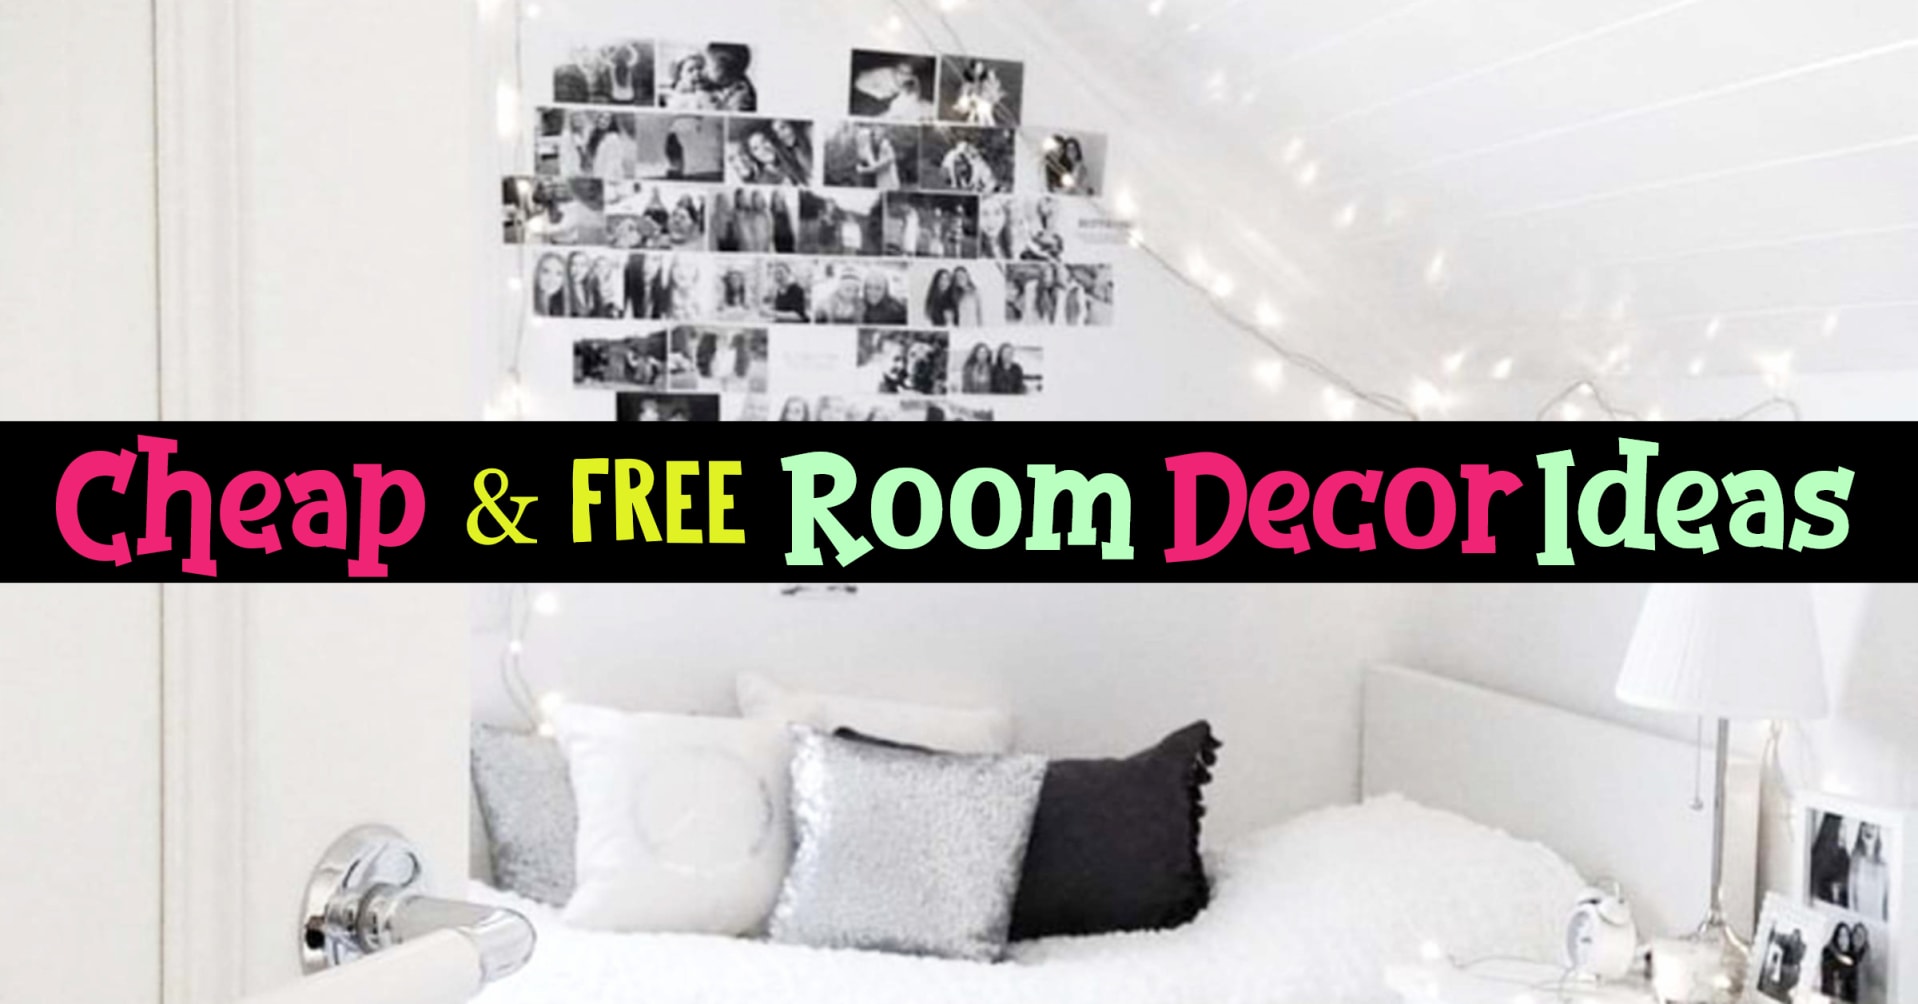 Cheap bedroom decorating ideas - how to decorate your room without spending money - cheap room decor ideas